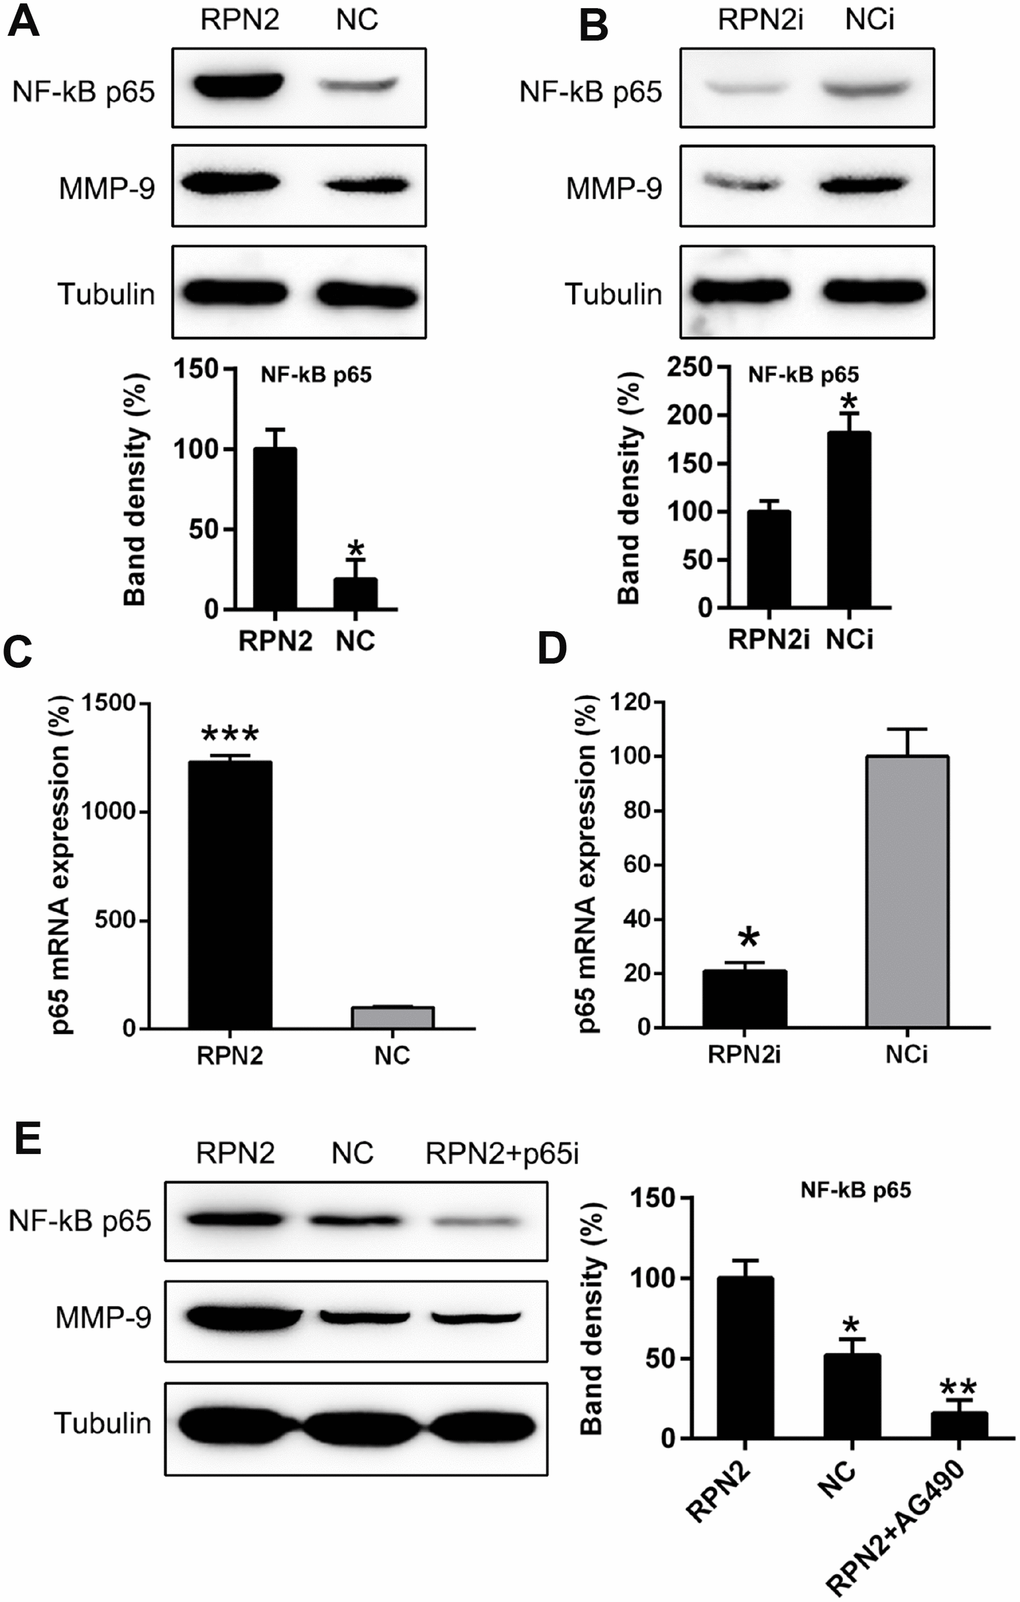 NF-κB is partially responsible for RPN2-mediated MMP-9 expressive level in HepG2 cells. (A, B) HepG2 cells were transfected with AD-RPN2 or shRNA-RPN2 to modulate the RPN2 level, WB assay was conducted to examine the MMP-9 as well as NF-κB protein expression. (C, D) mRNA expression of MMP-9 and NF-κB p65 was then analyzed by qPCR. (E) HepG2 cells stably expressing RPN2 were transfected with shRNA-p65 to silencing the p65 expression. Protein expression of MMP-9 and p65 were then determined via WB. The band of target protein was normalized to the density of action. The quantification was performed independently in a single band. The experiments were performed three times. Data are represented as mean ± SD. *P P 